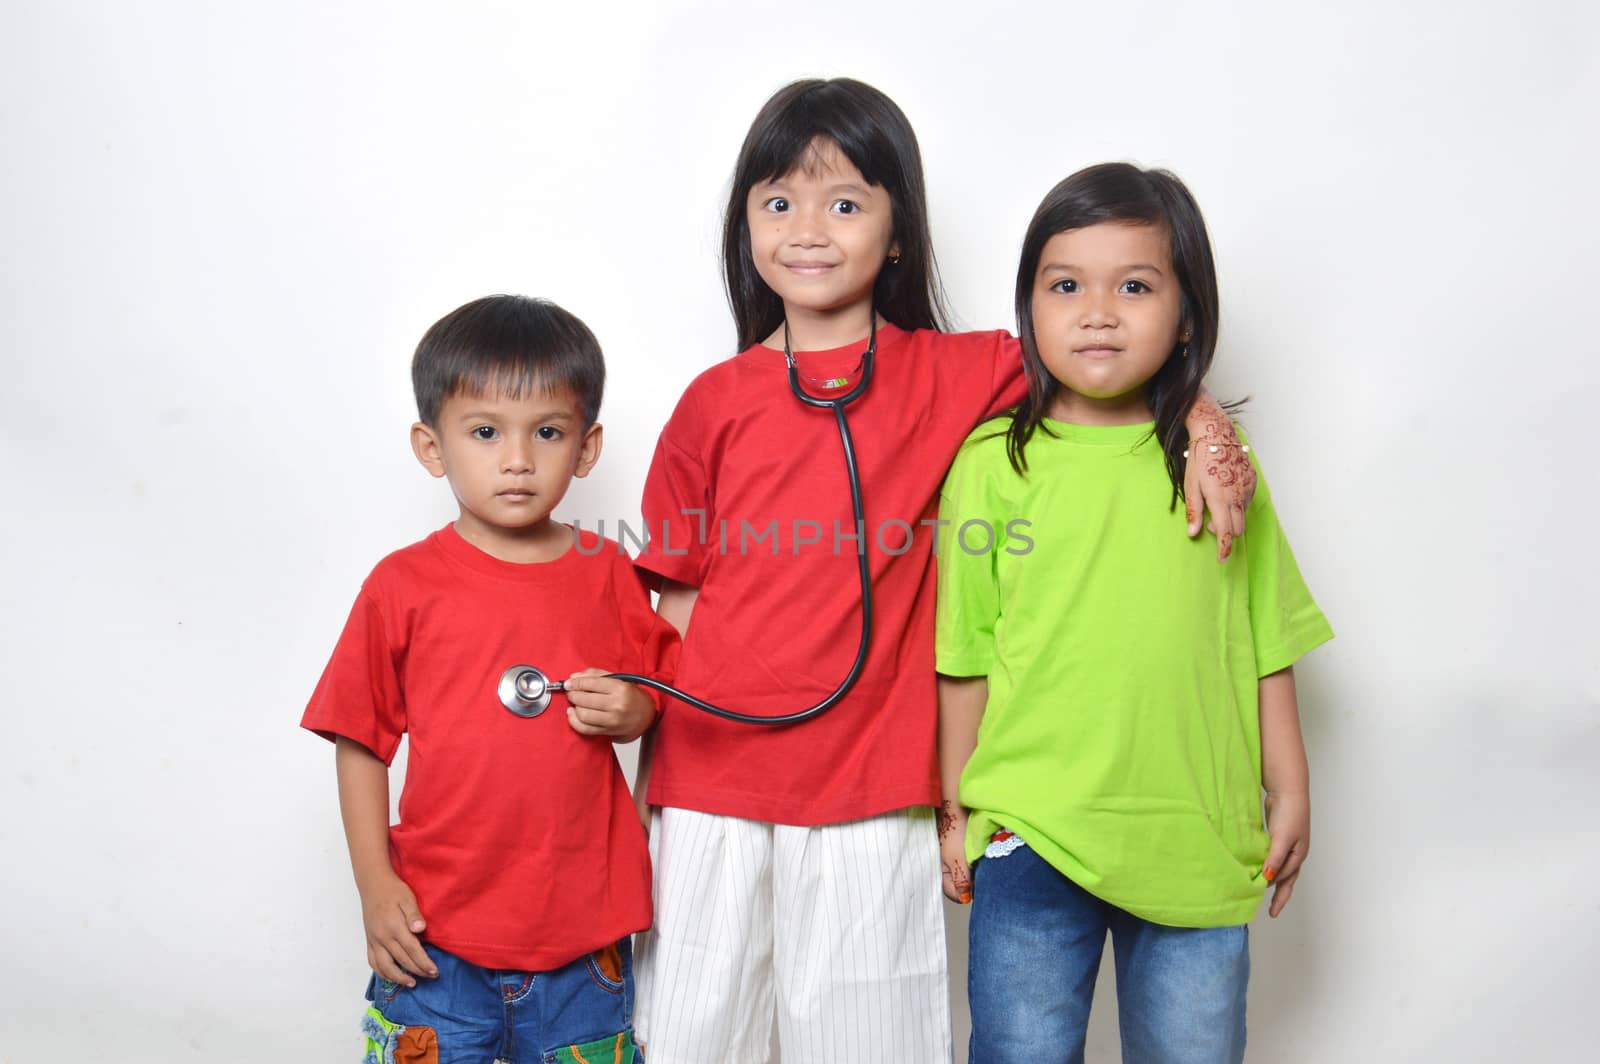 kidsl with a stethoscope by antonihalim